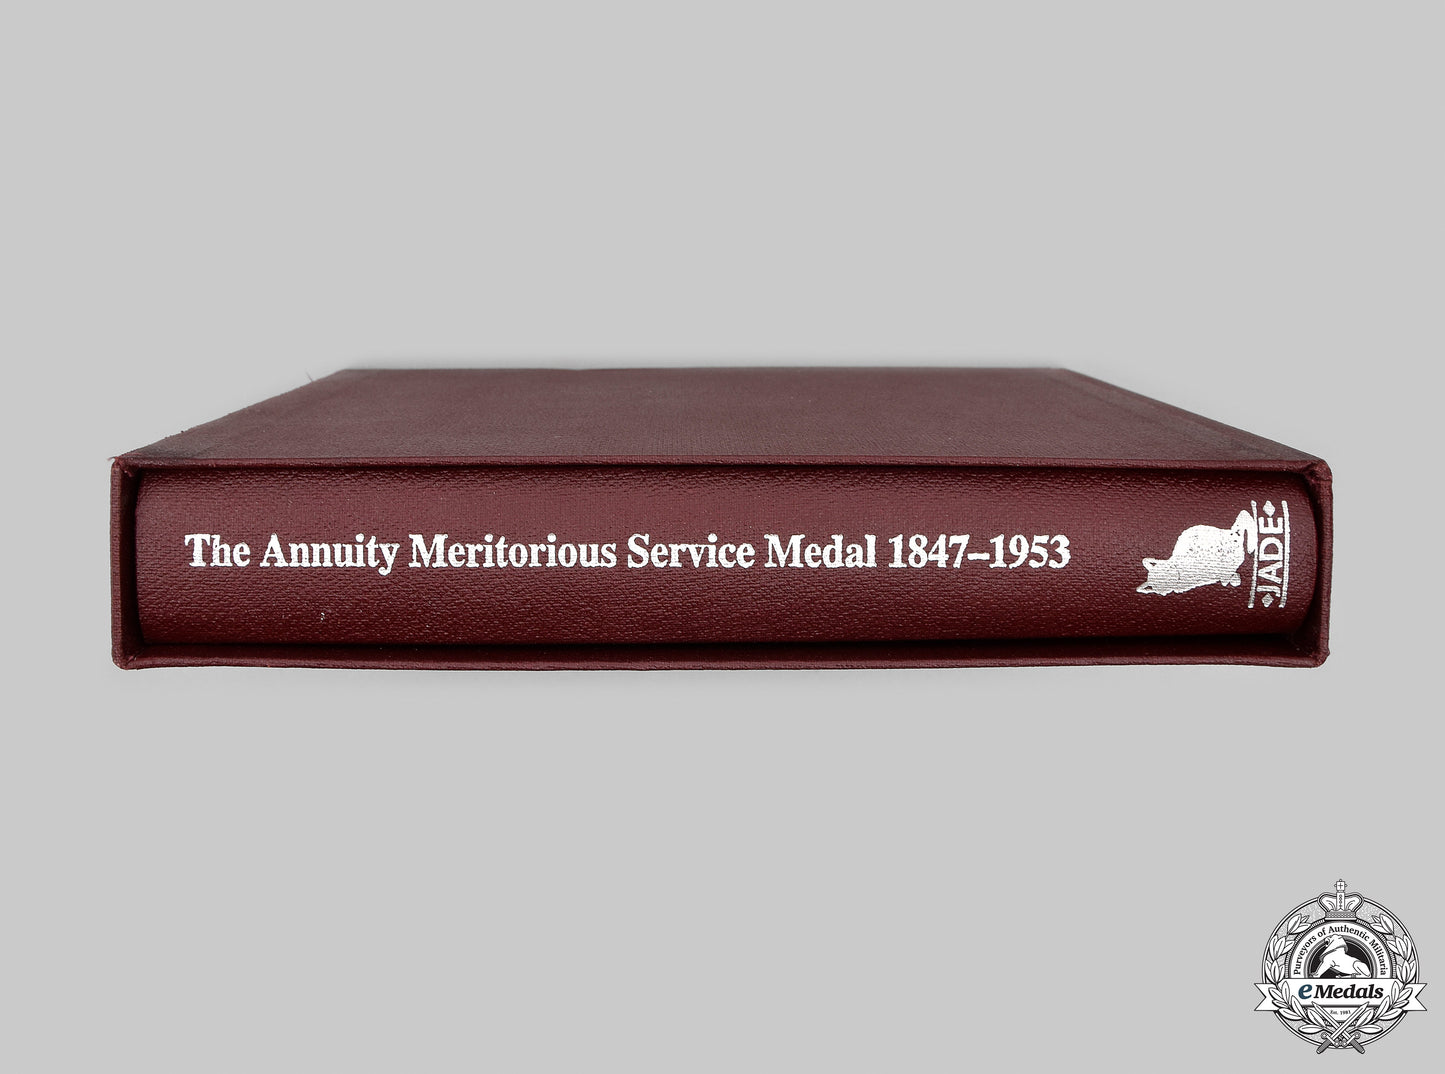 united_kingdom._the_annuity_meritorious_service_medal1847-1953_m21_0100_mnc5767